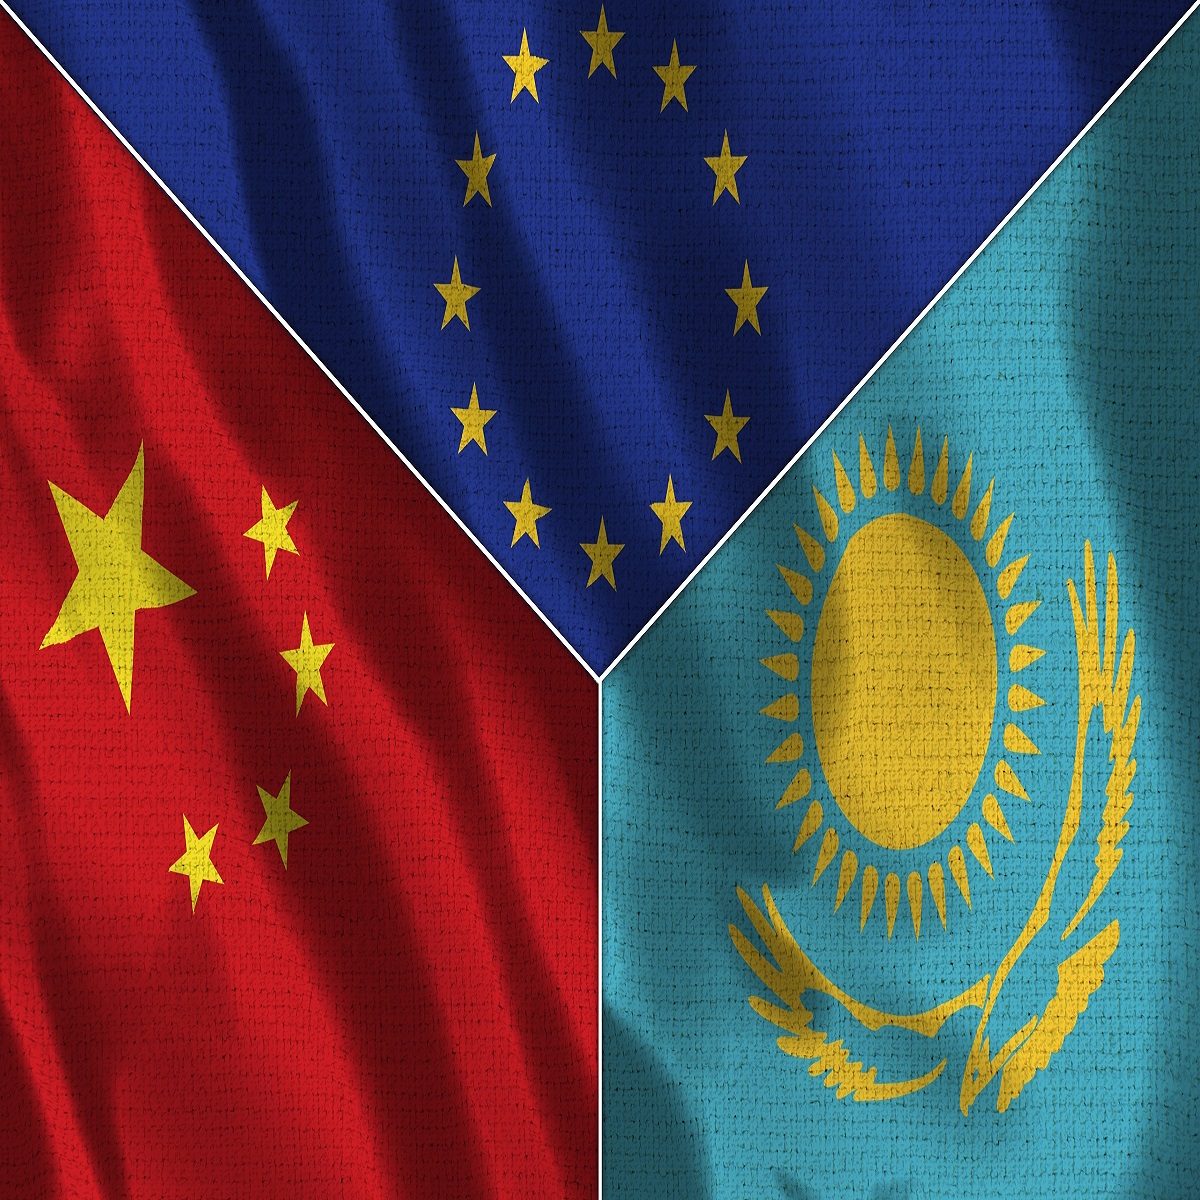 Flags of Kazakhsatn, China, and European Union pictured in one frame